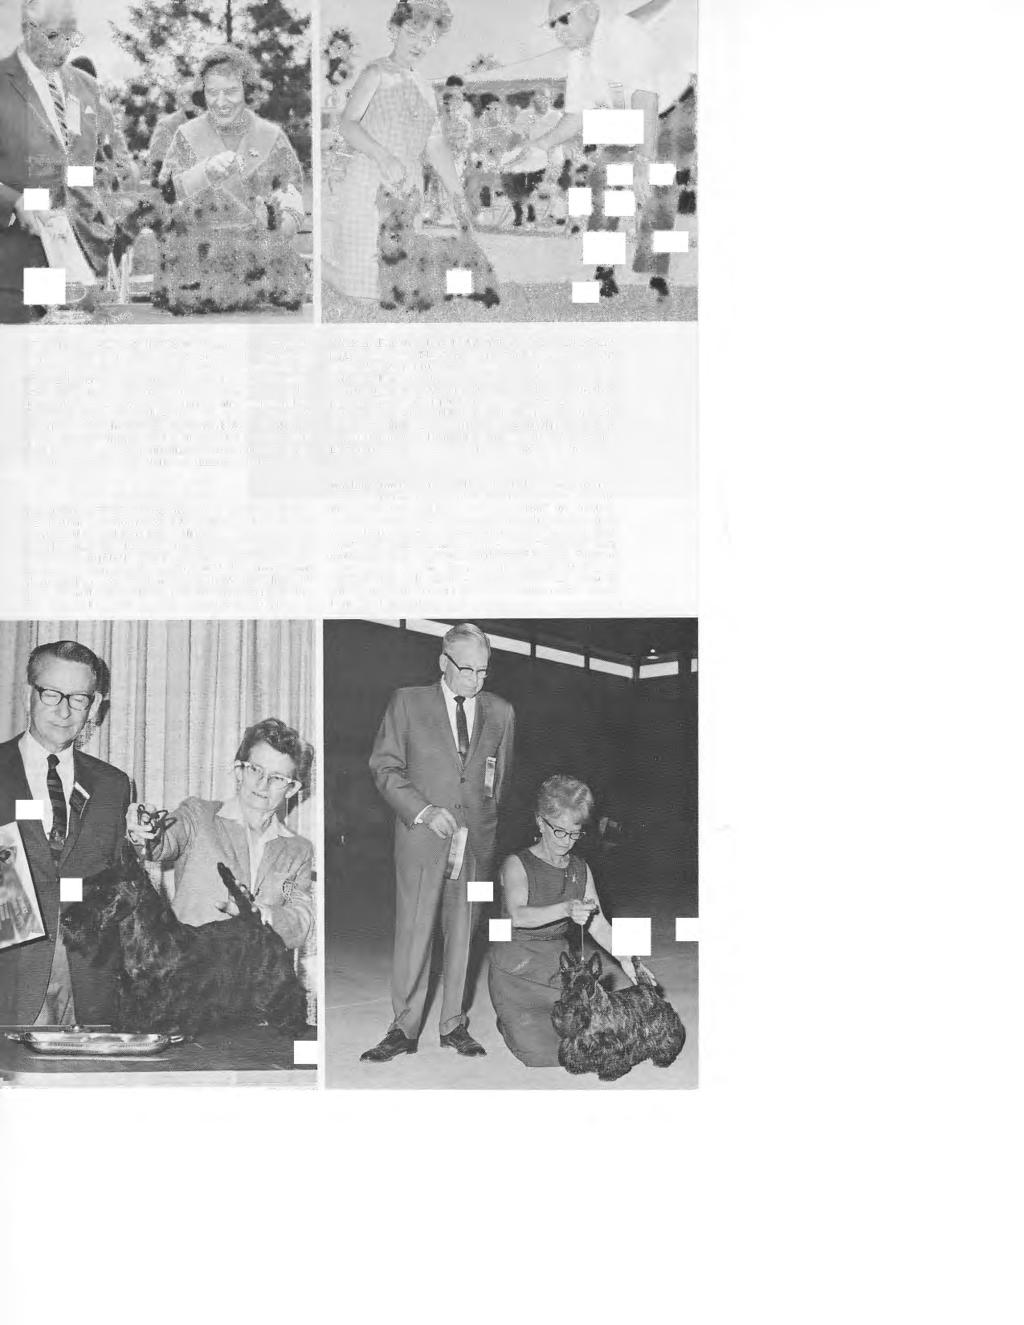 CH. REVRAN REPRISE wins her second Specialty of 1967 by topping 79 Scotties at the S.T.C.A. Specialty under breeder-judge,!\'ir. Robert Sharp, handled by her breeder and co-owner, Constance Swatsley.